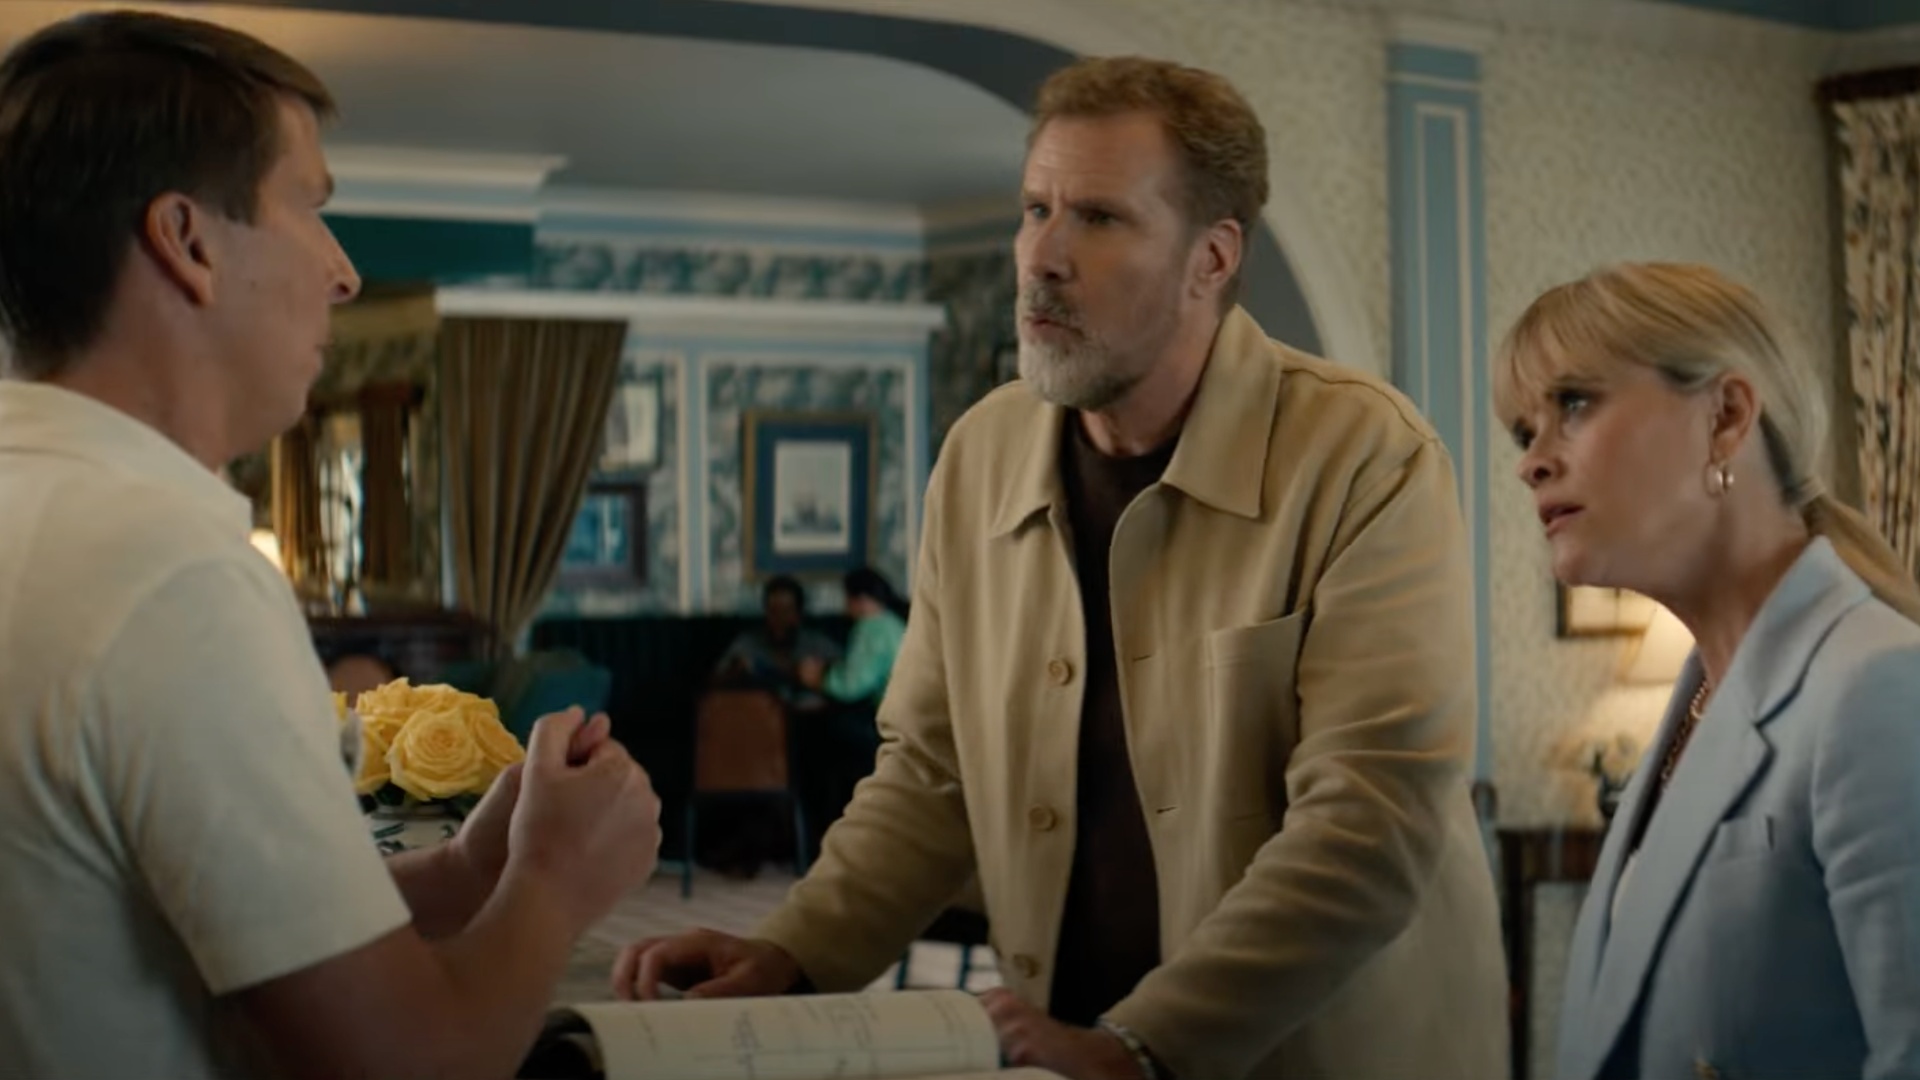 Top Video finds trailer for its R-rated rom-com with Will Ferrell and Reese Witherspoon – and teases a Road Home sequel